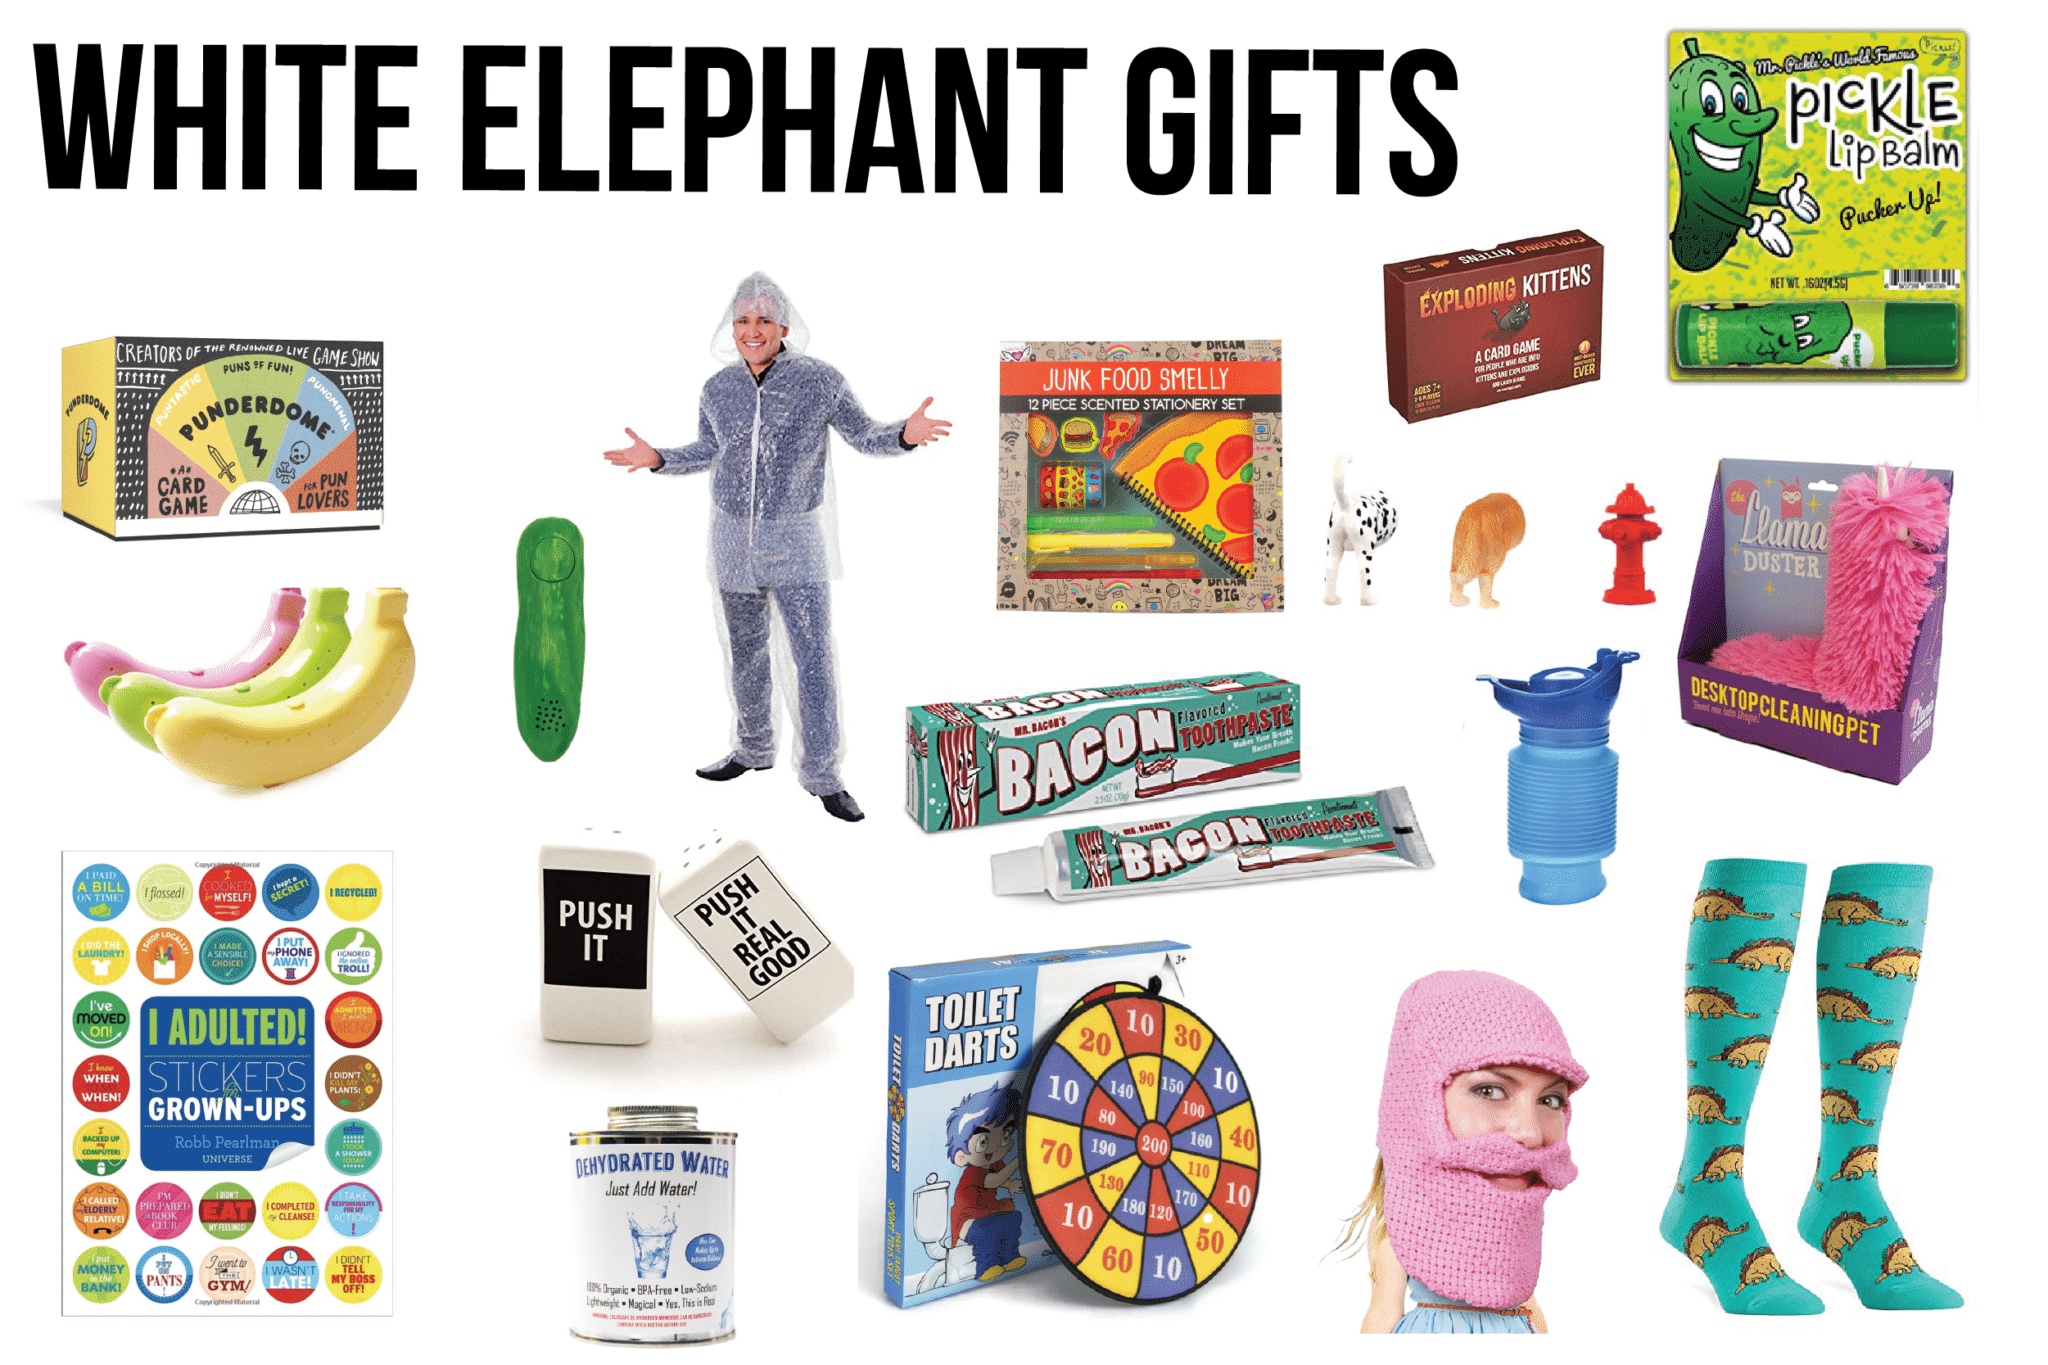 10 Best White Elephant Gifts In 2018